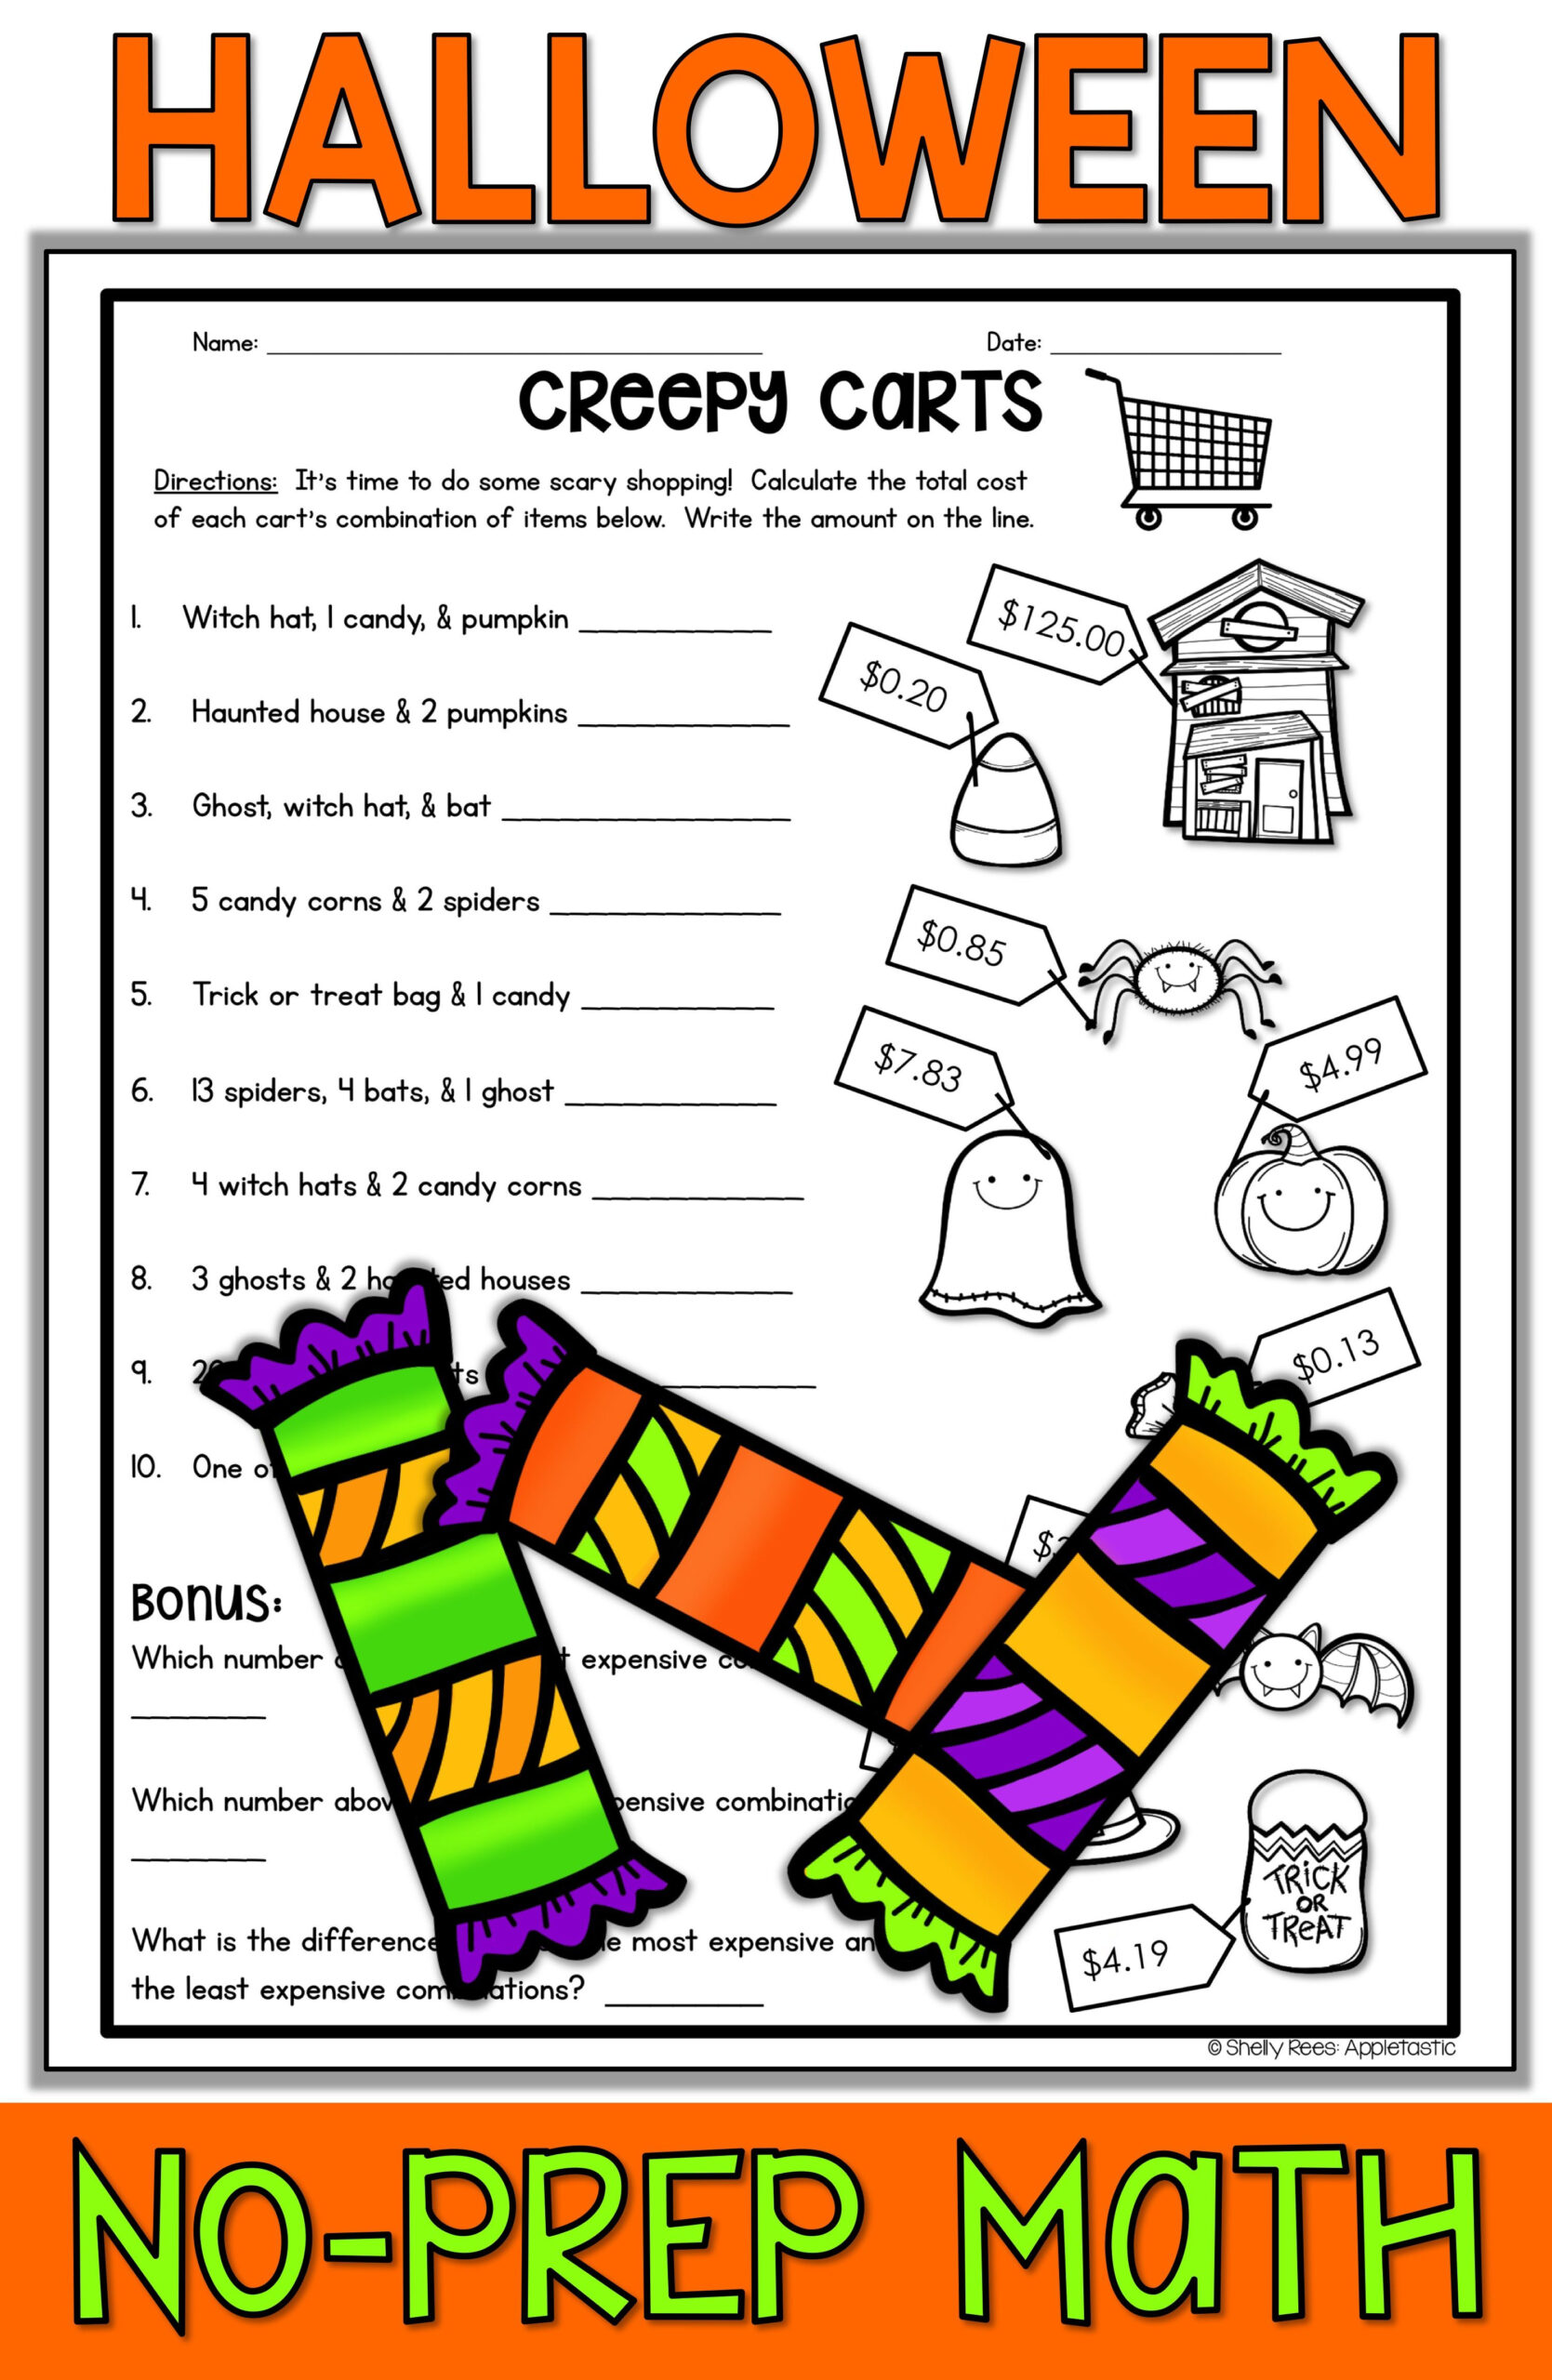 halloween-science-worksheets-for-high-school-alphabetworksheetsfree